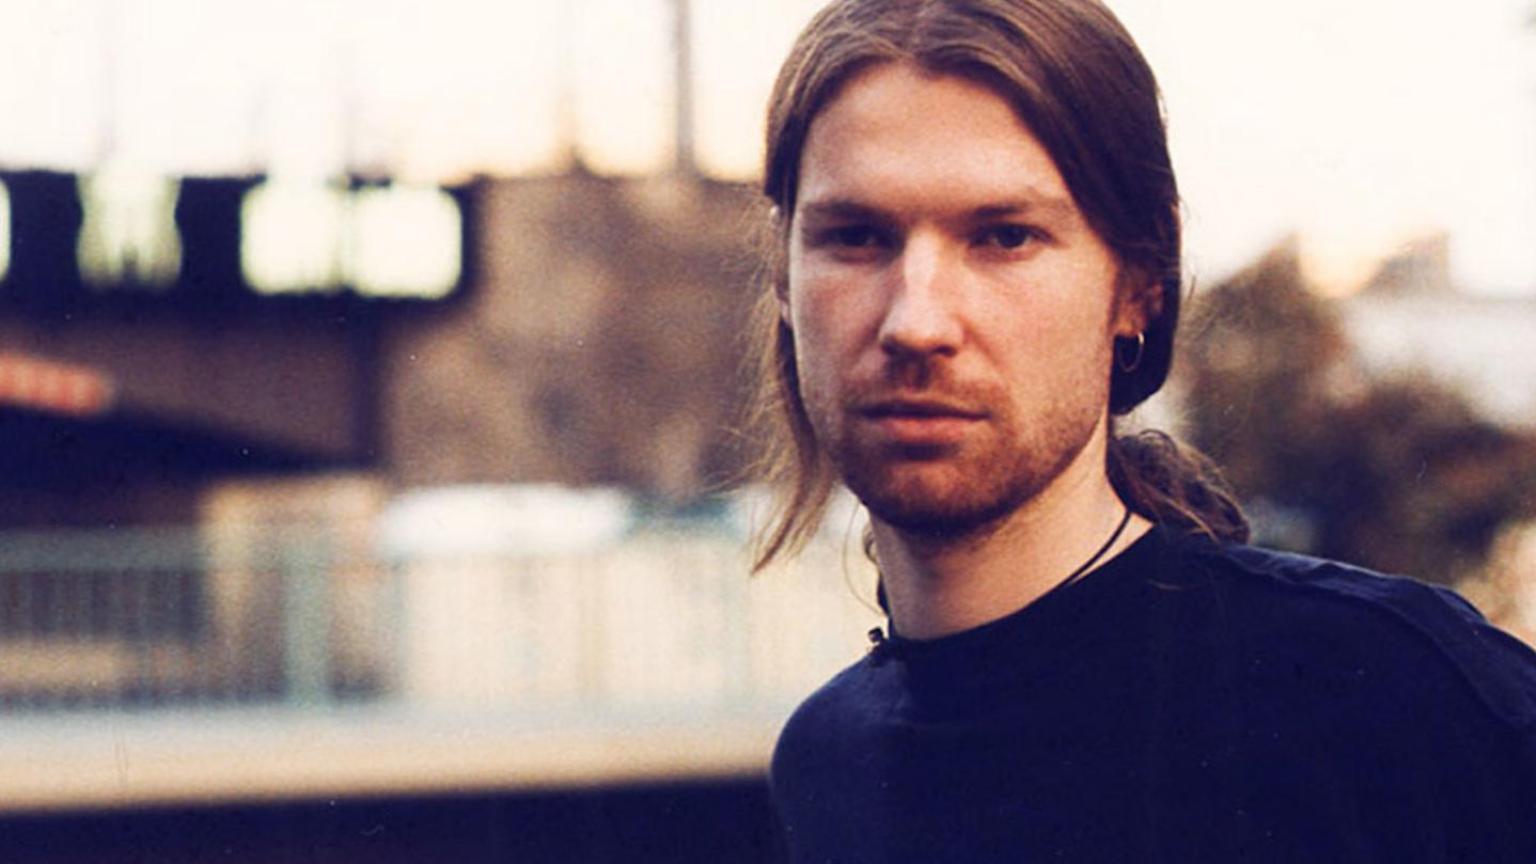 Aphex Twin Discusses Beliefs On Vaccines In New Soundcloud Comments